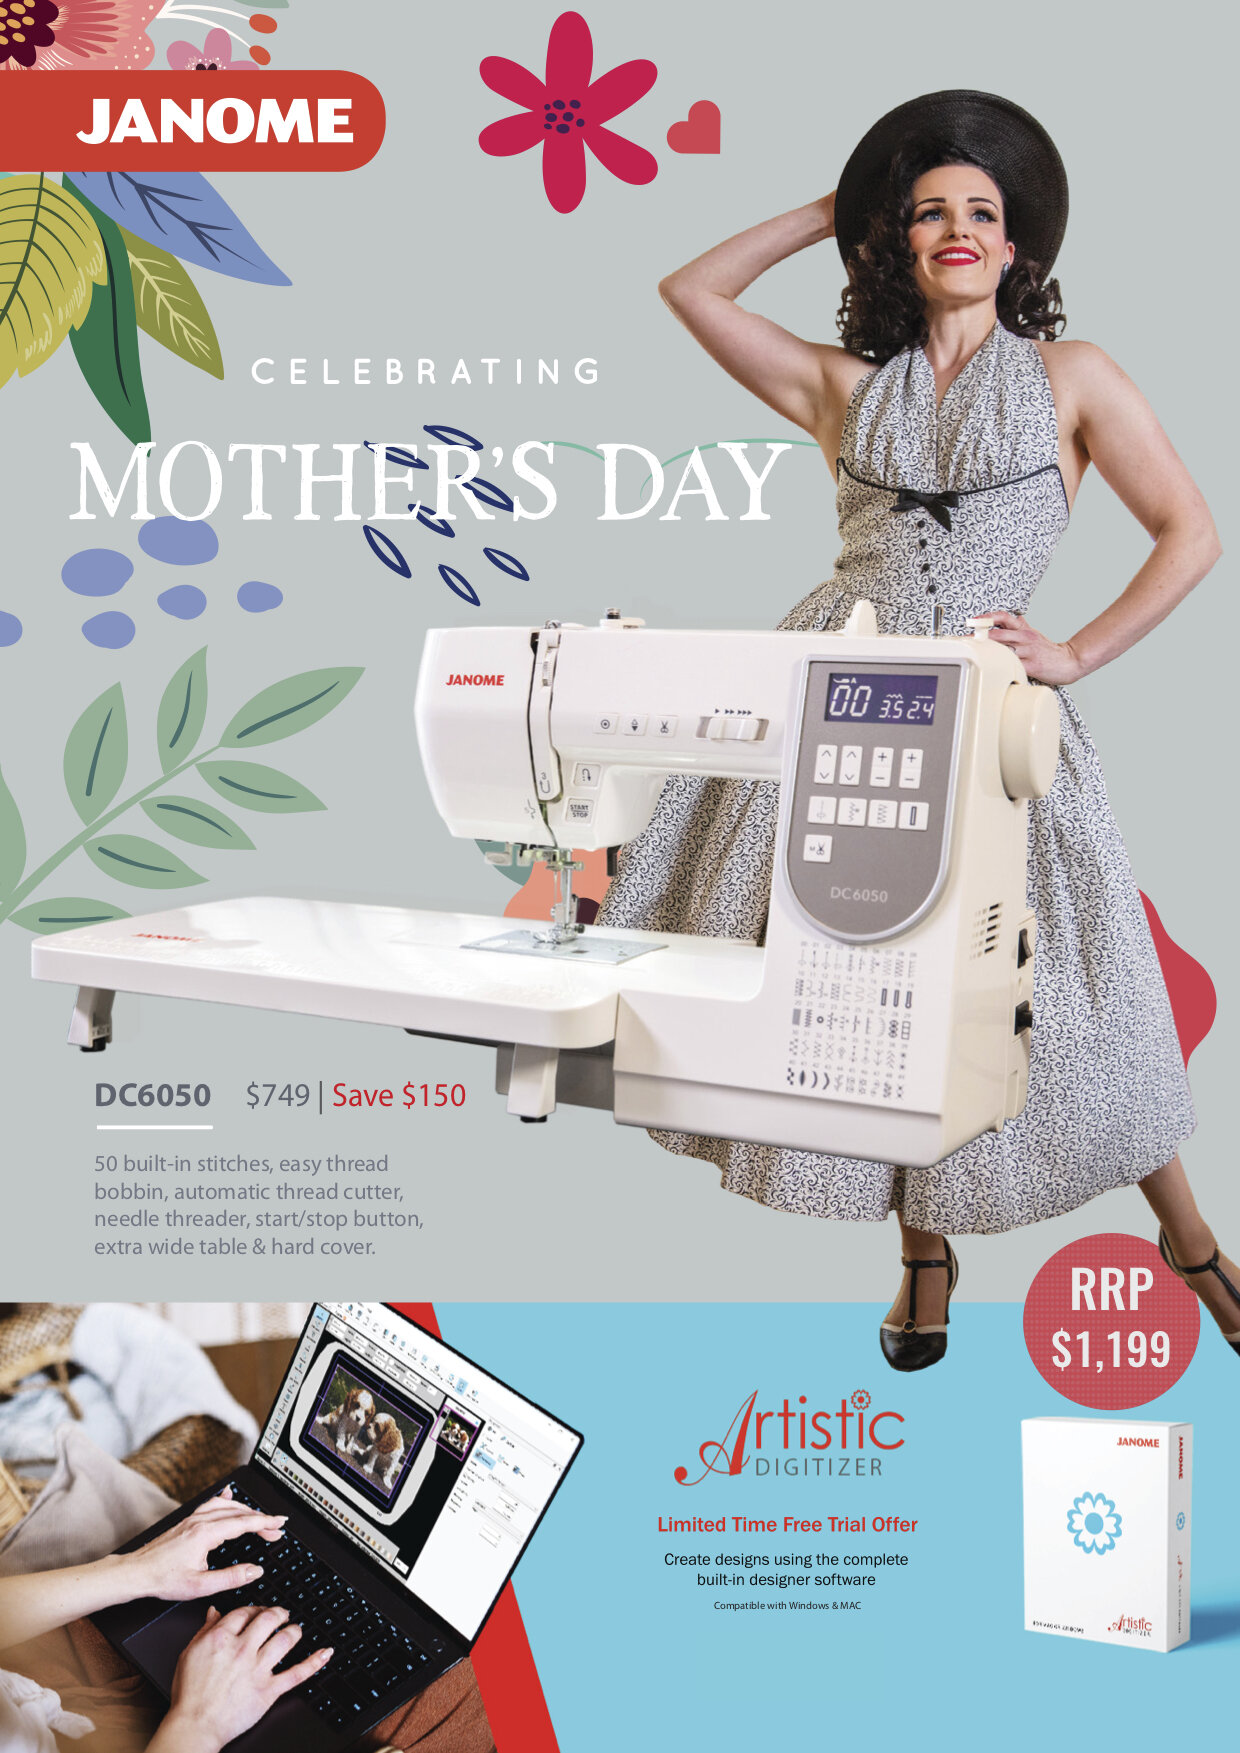 Mothers-Day-Mailer-2020.jpg